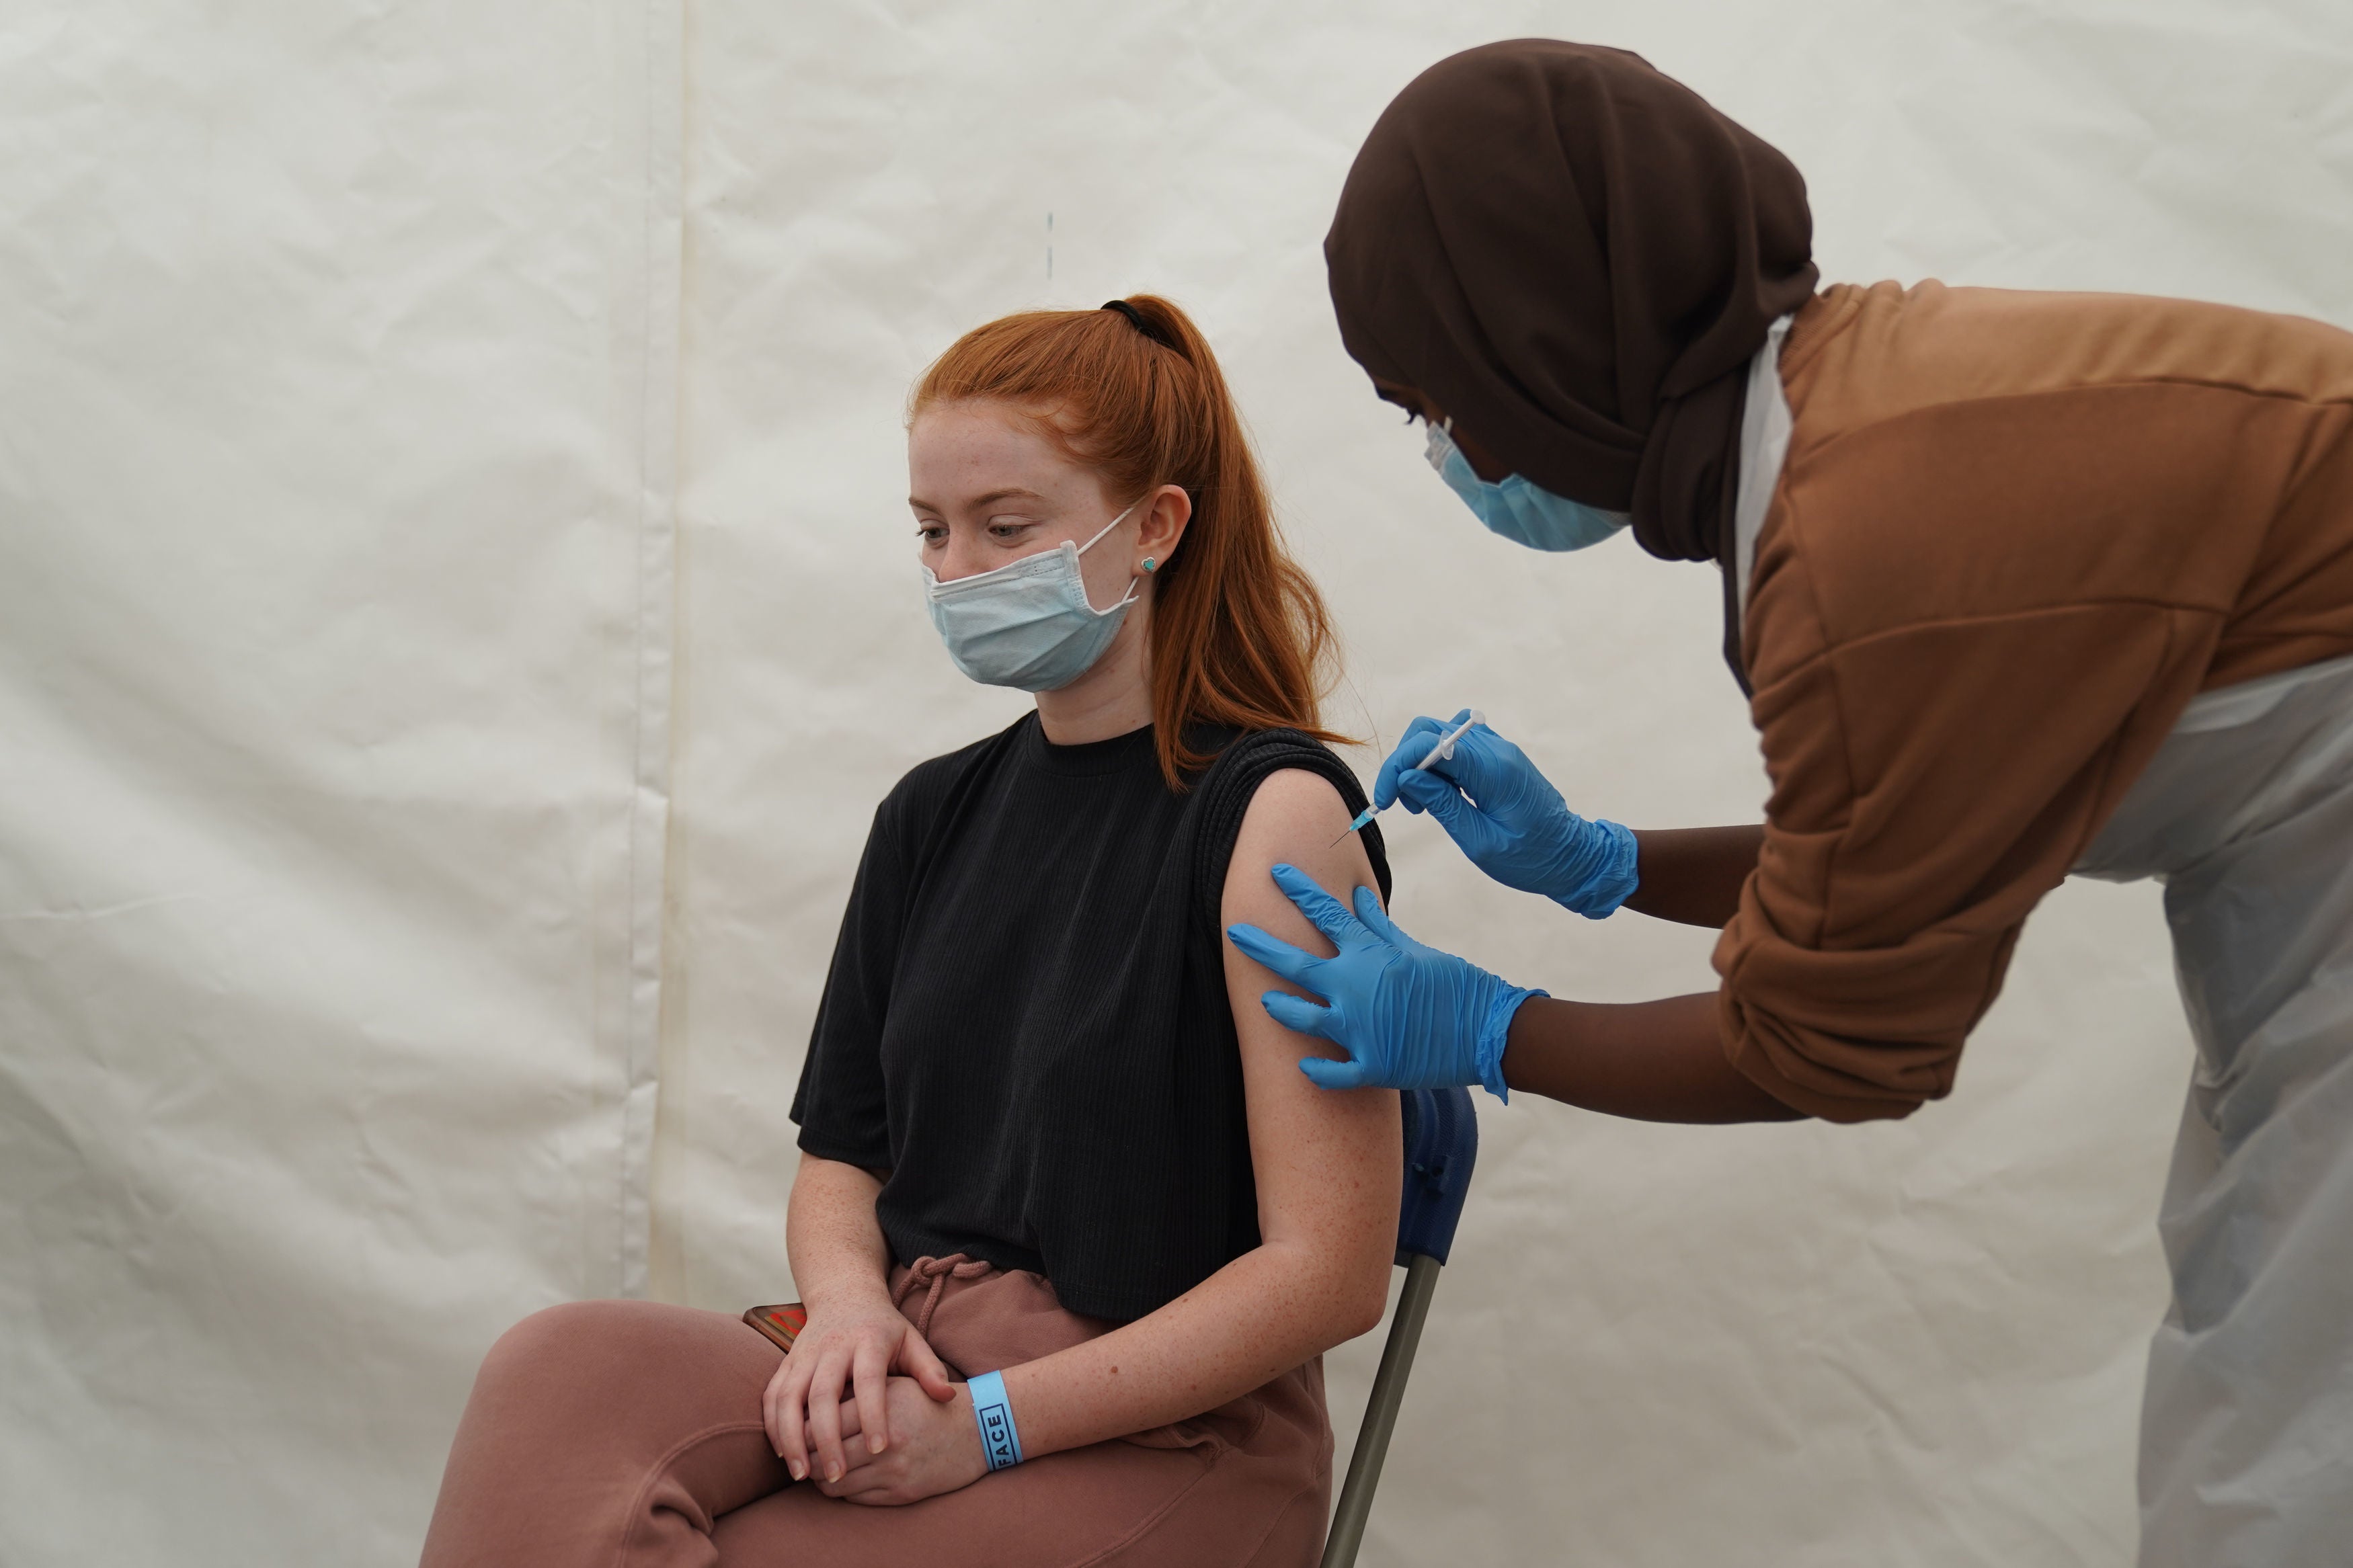 Teenagers who test positive for coronavirus will now have to wait twelve weeks to get their vaccine, rather than four weeks